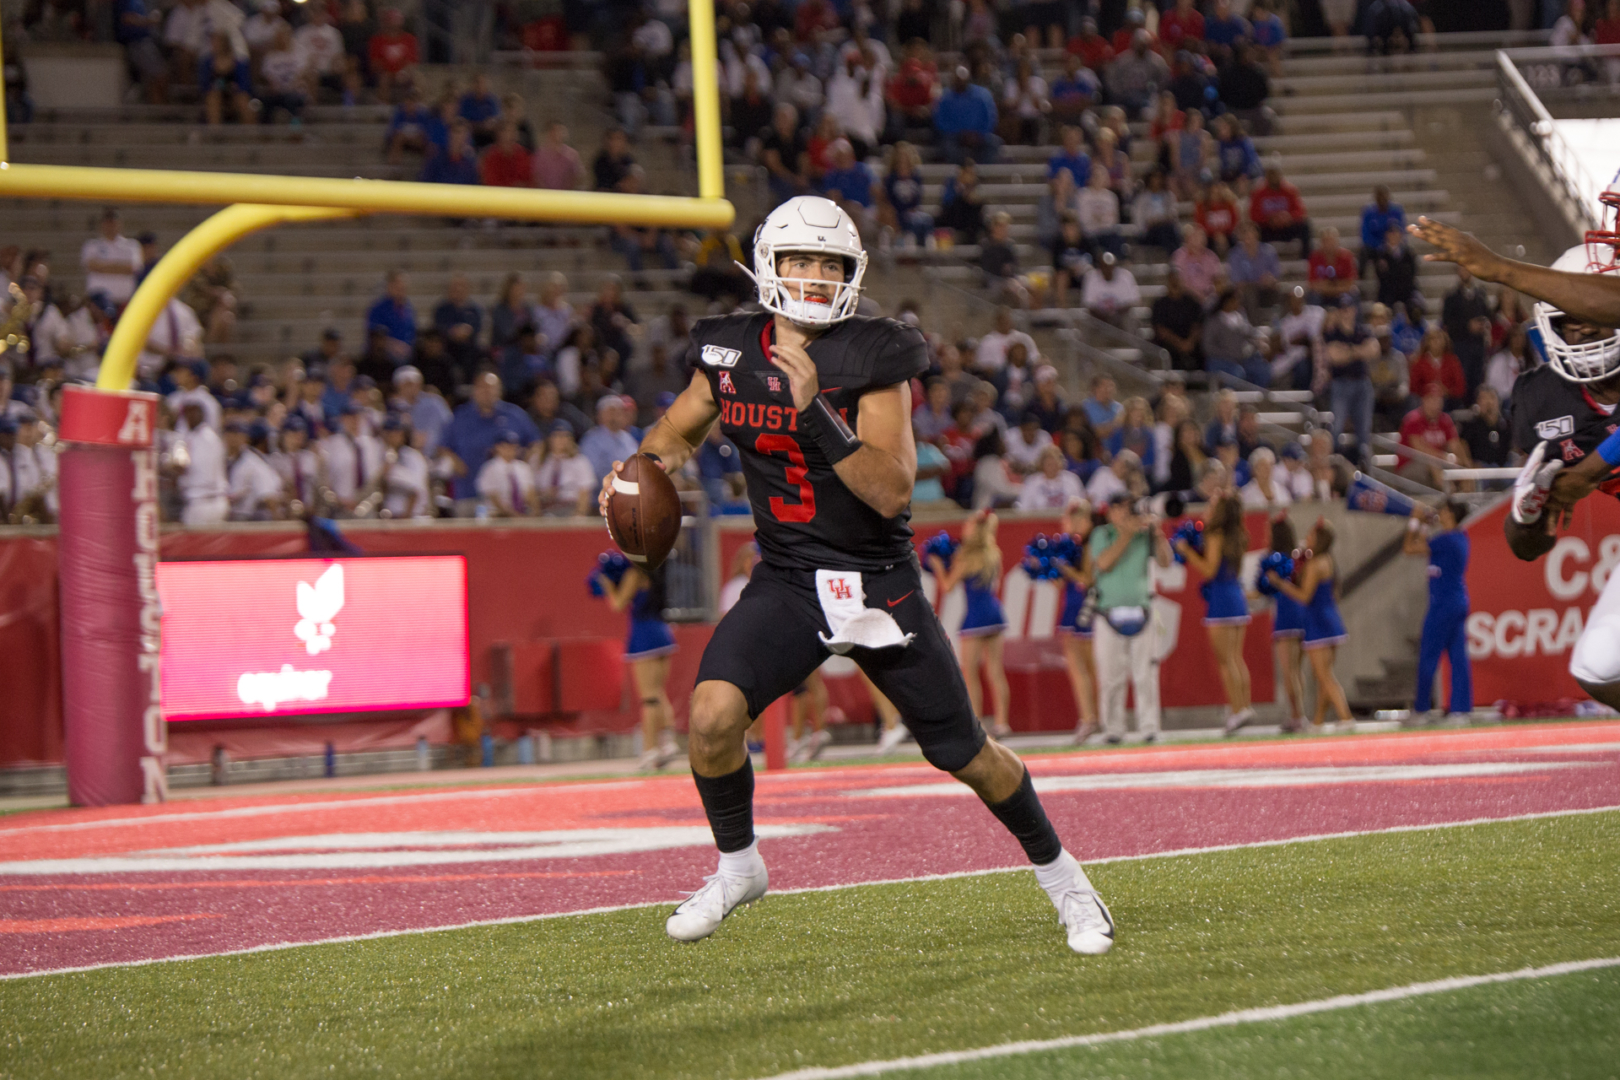 Junior quarterback Clayton Tune accounted for three touchdowns in UH’s victory over the Tulane Green Wave. | File photo